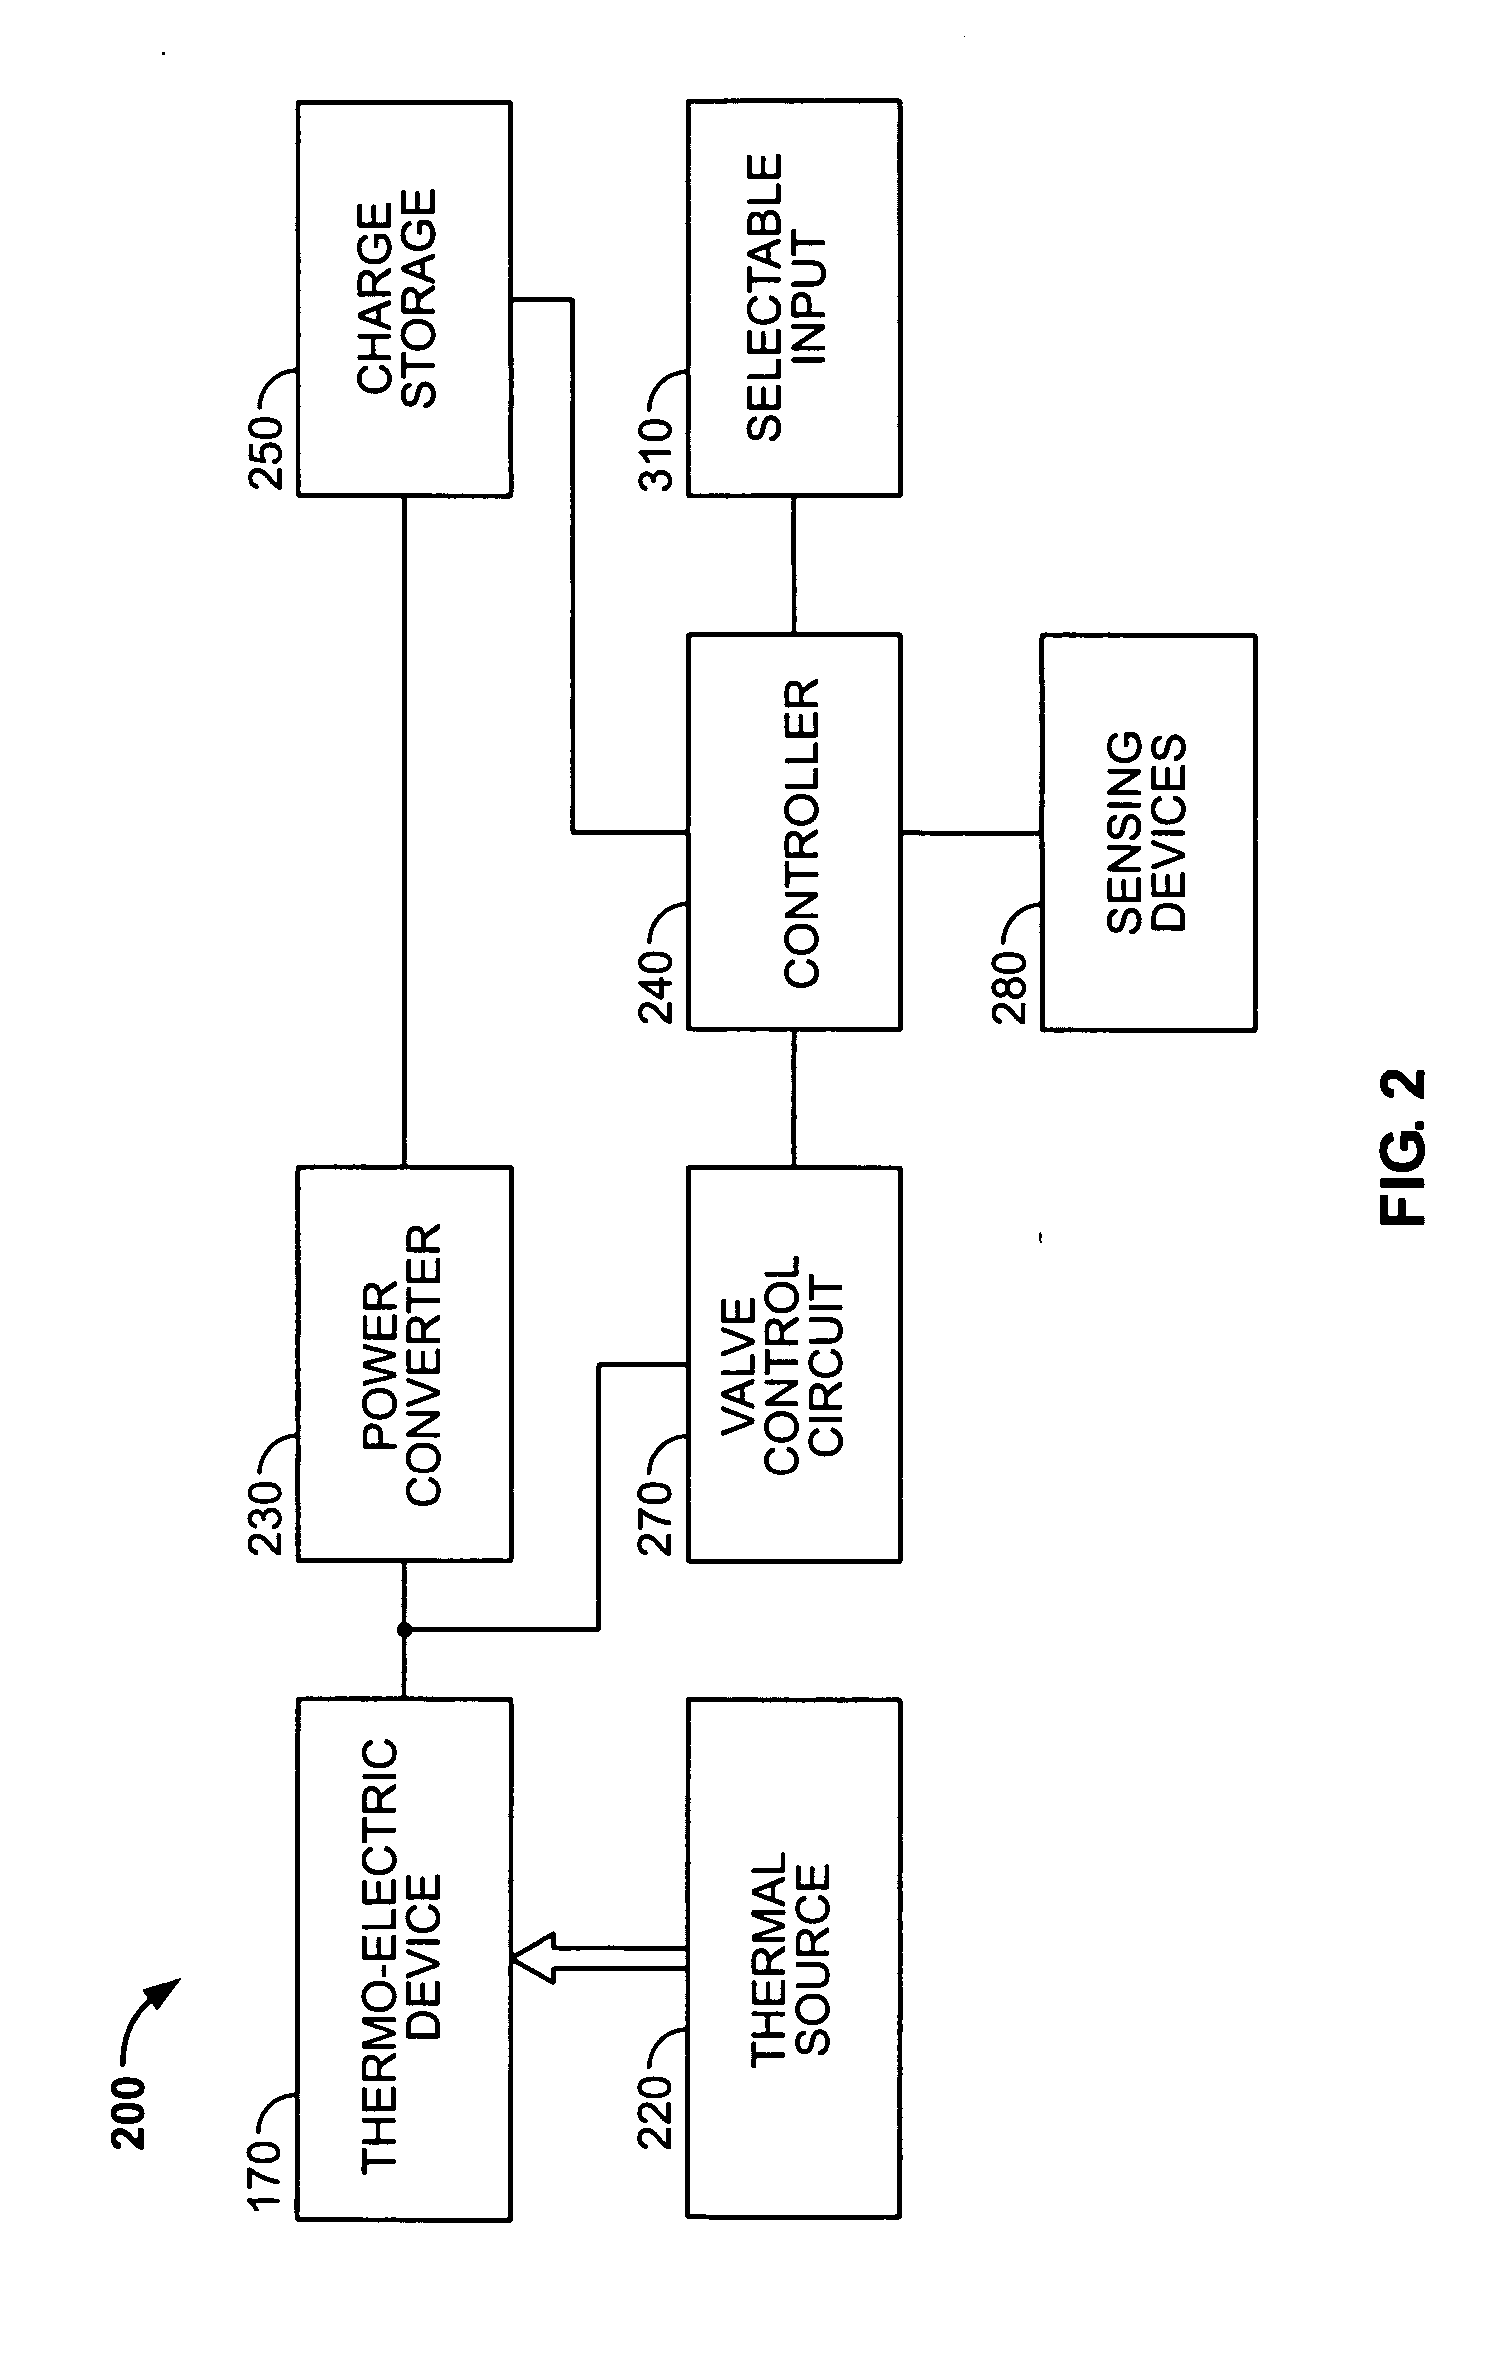 Method and system for pilot light safety